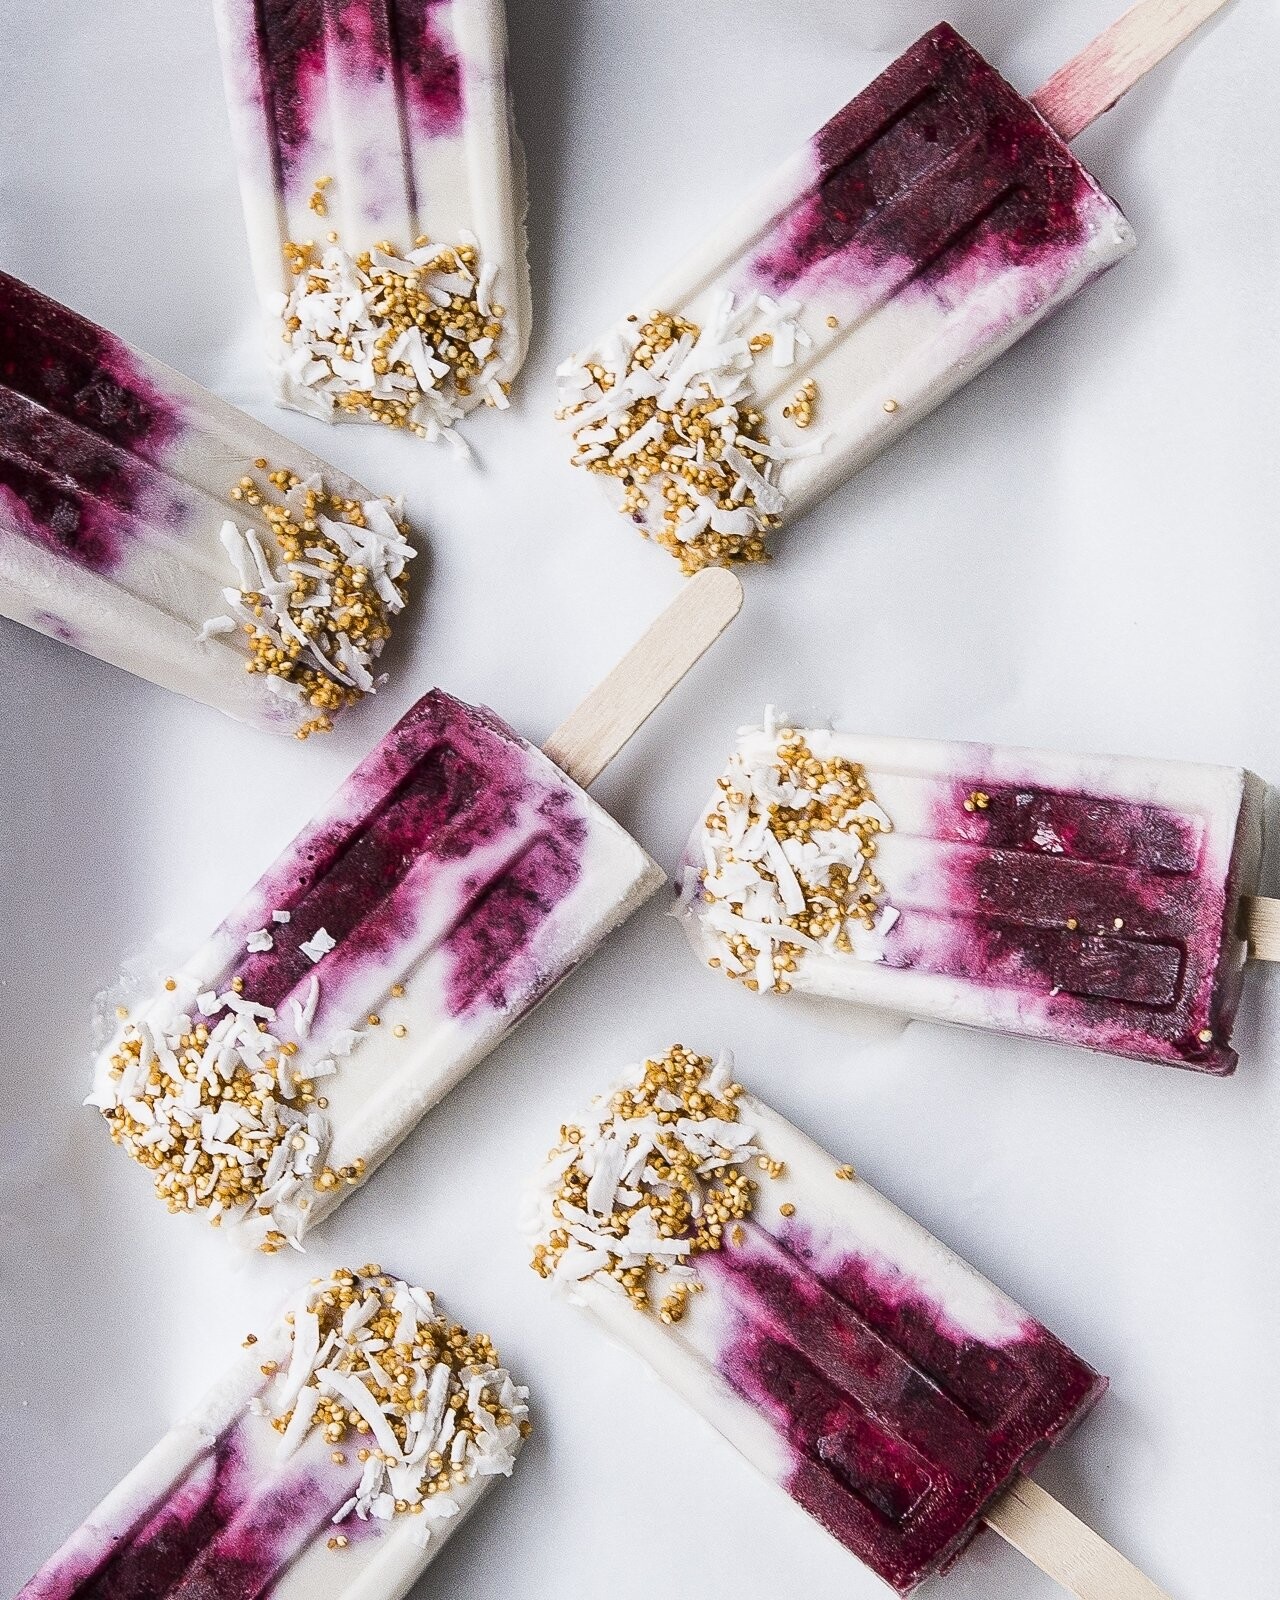 These coconut milk mixed berries popsicles dipped with toasted quinoa and shredded coconuts are the perfect elements for creating a modern palette of a clean background contrasting with punches of bold magenta hues. 